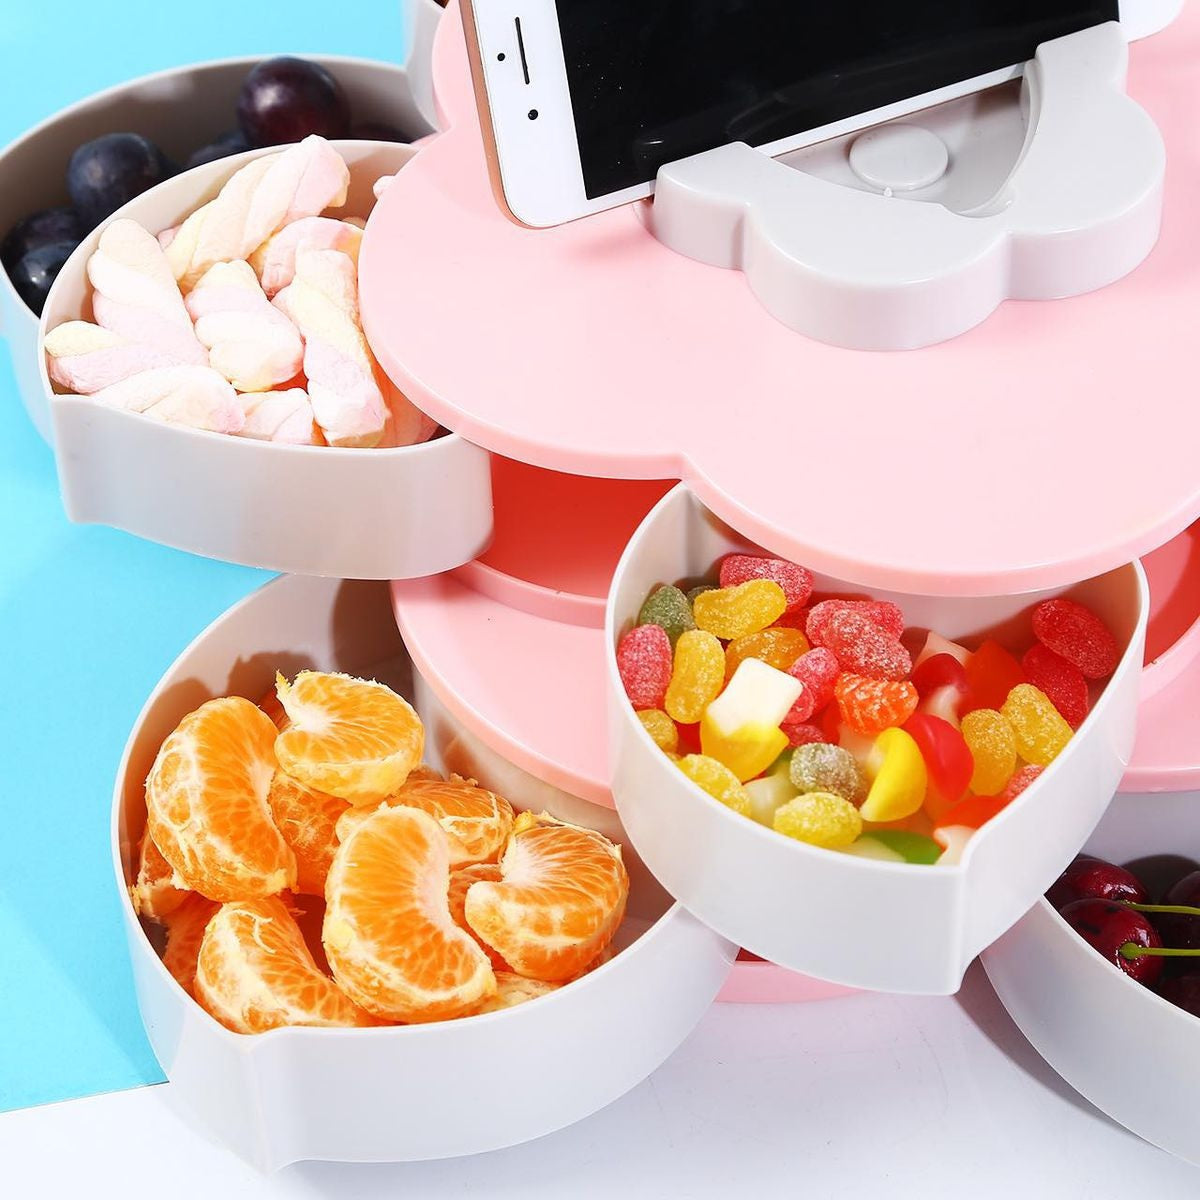 Pattern Rotating Fruit Bowl Double-Layer Rotating Fruit Candy Box - Pink MB100